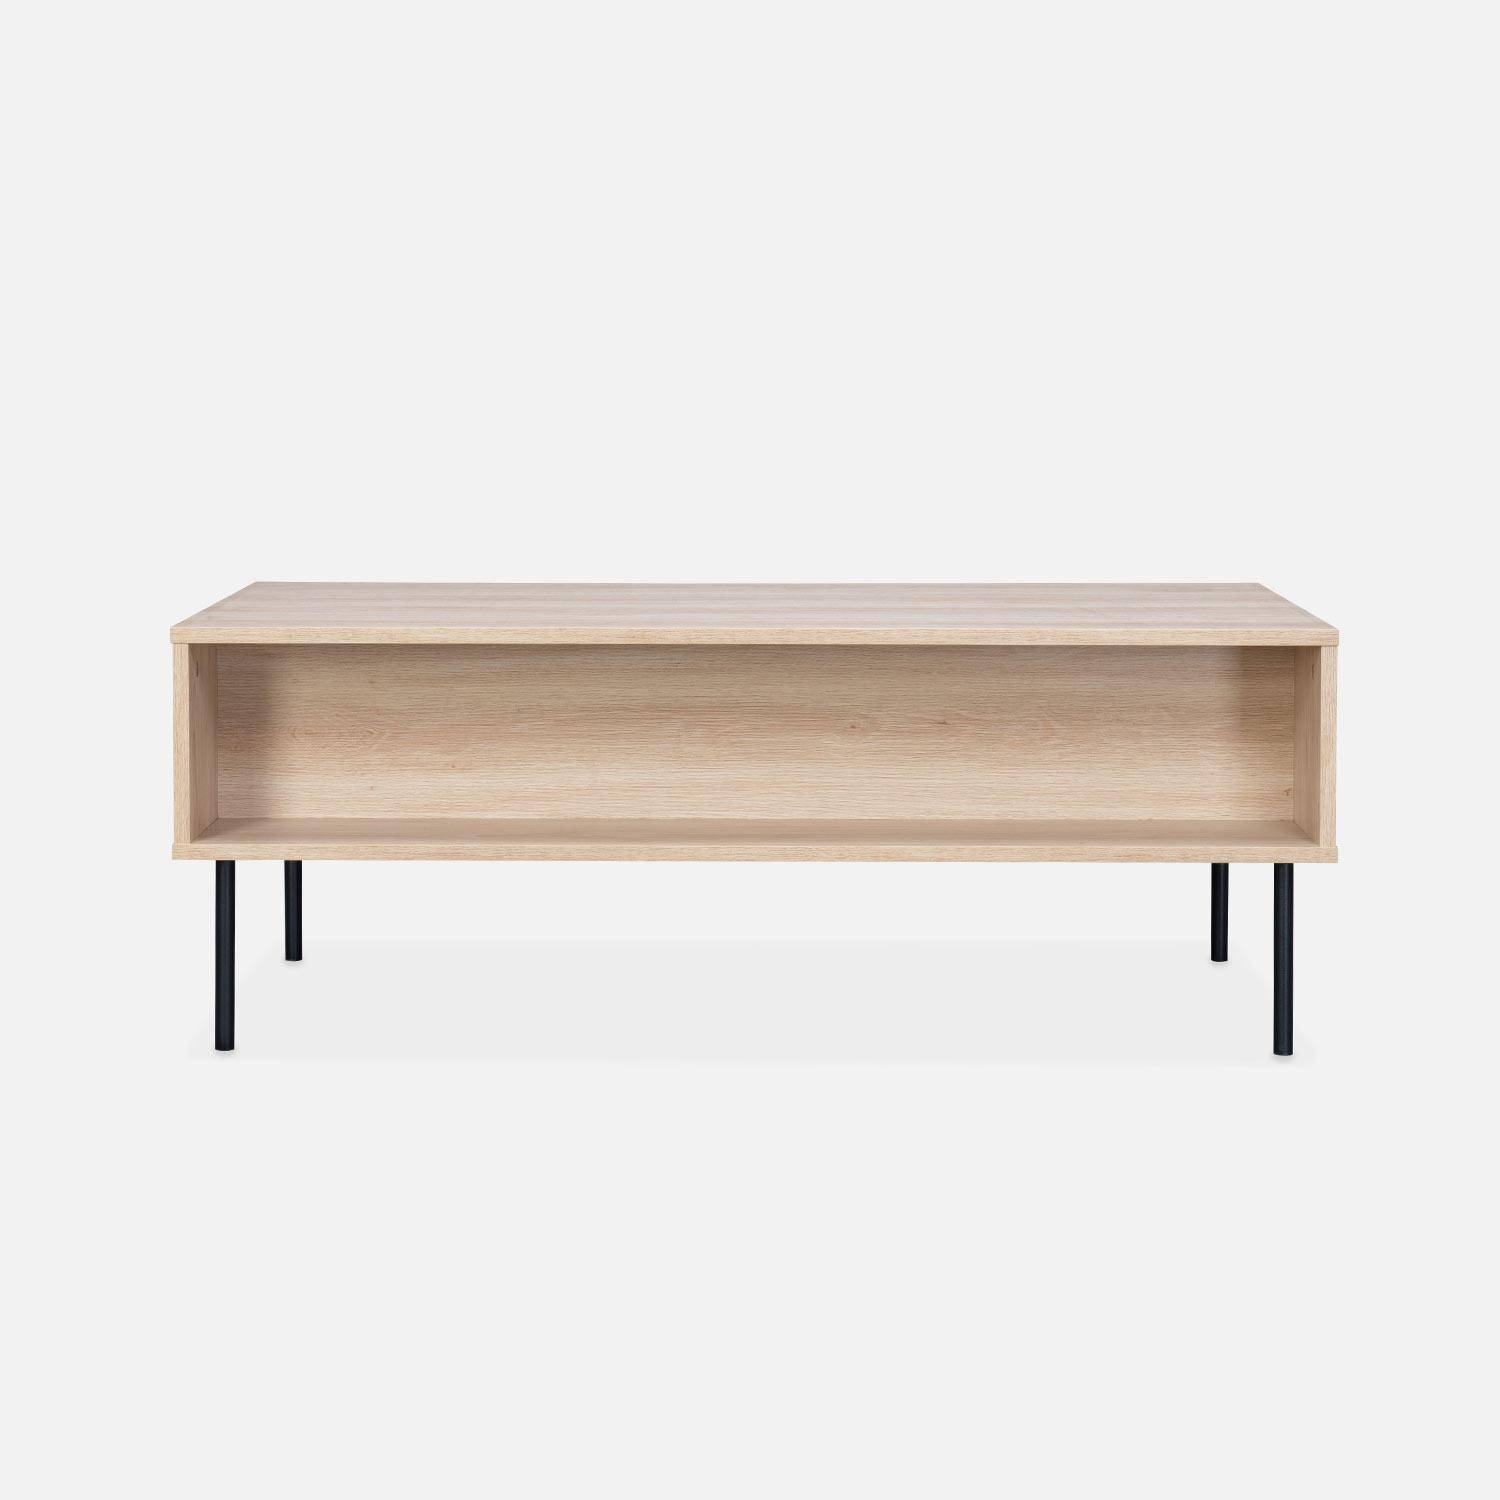 Grooved wood-effect coffee table with one drawer and storage nook, 110x59x41cm - Braga - Natural Photo5